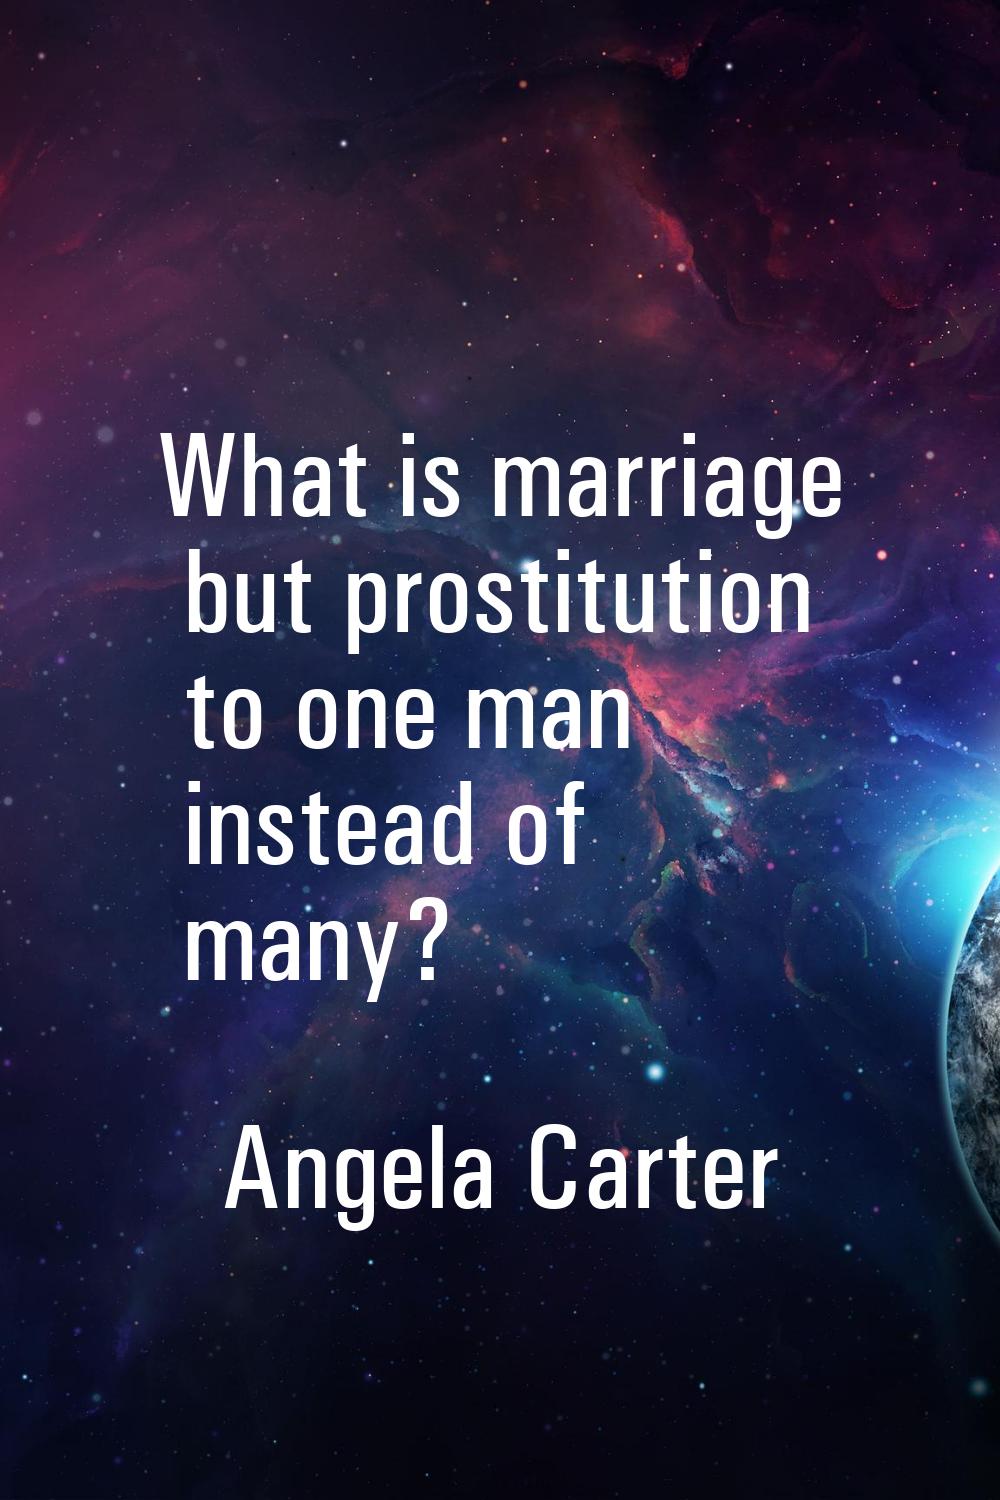 What is marriage but prostitution to one man instead of many?